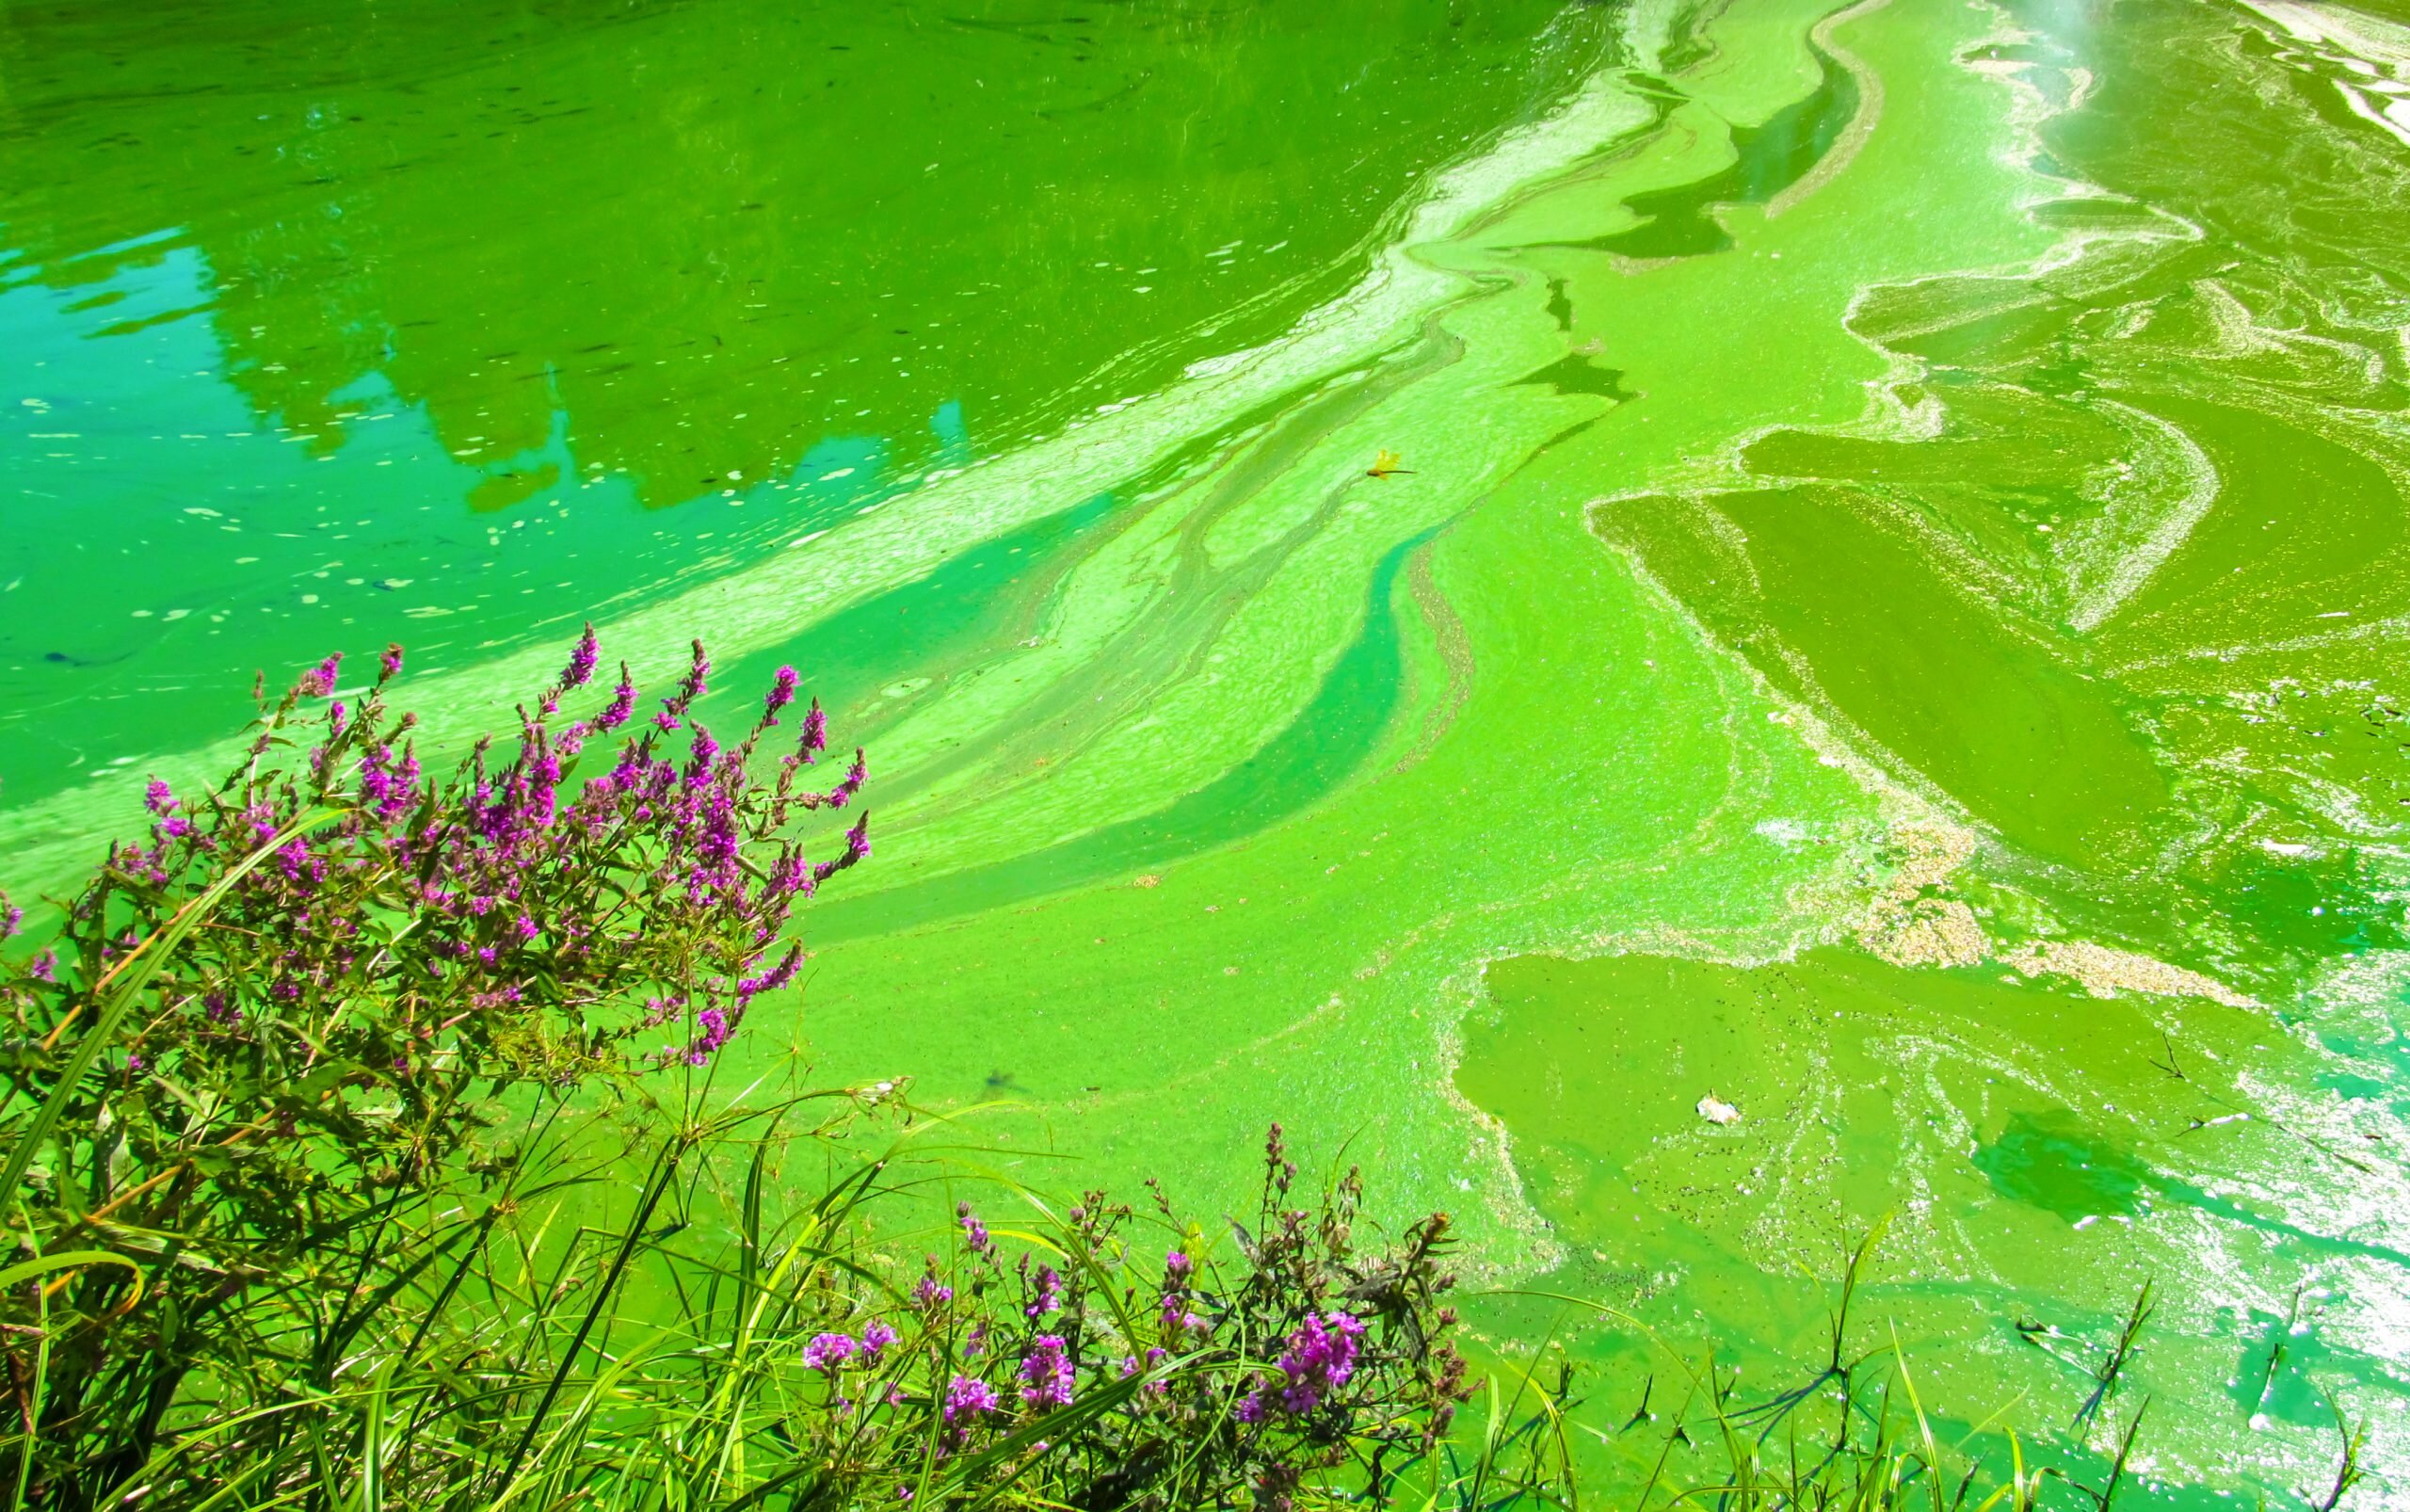 Controlling light could leave toxic algae dead in the water, researchers find - Phys.org